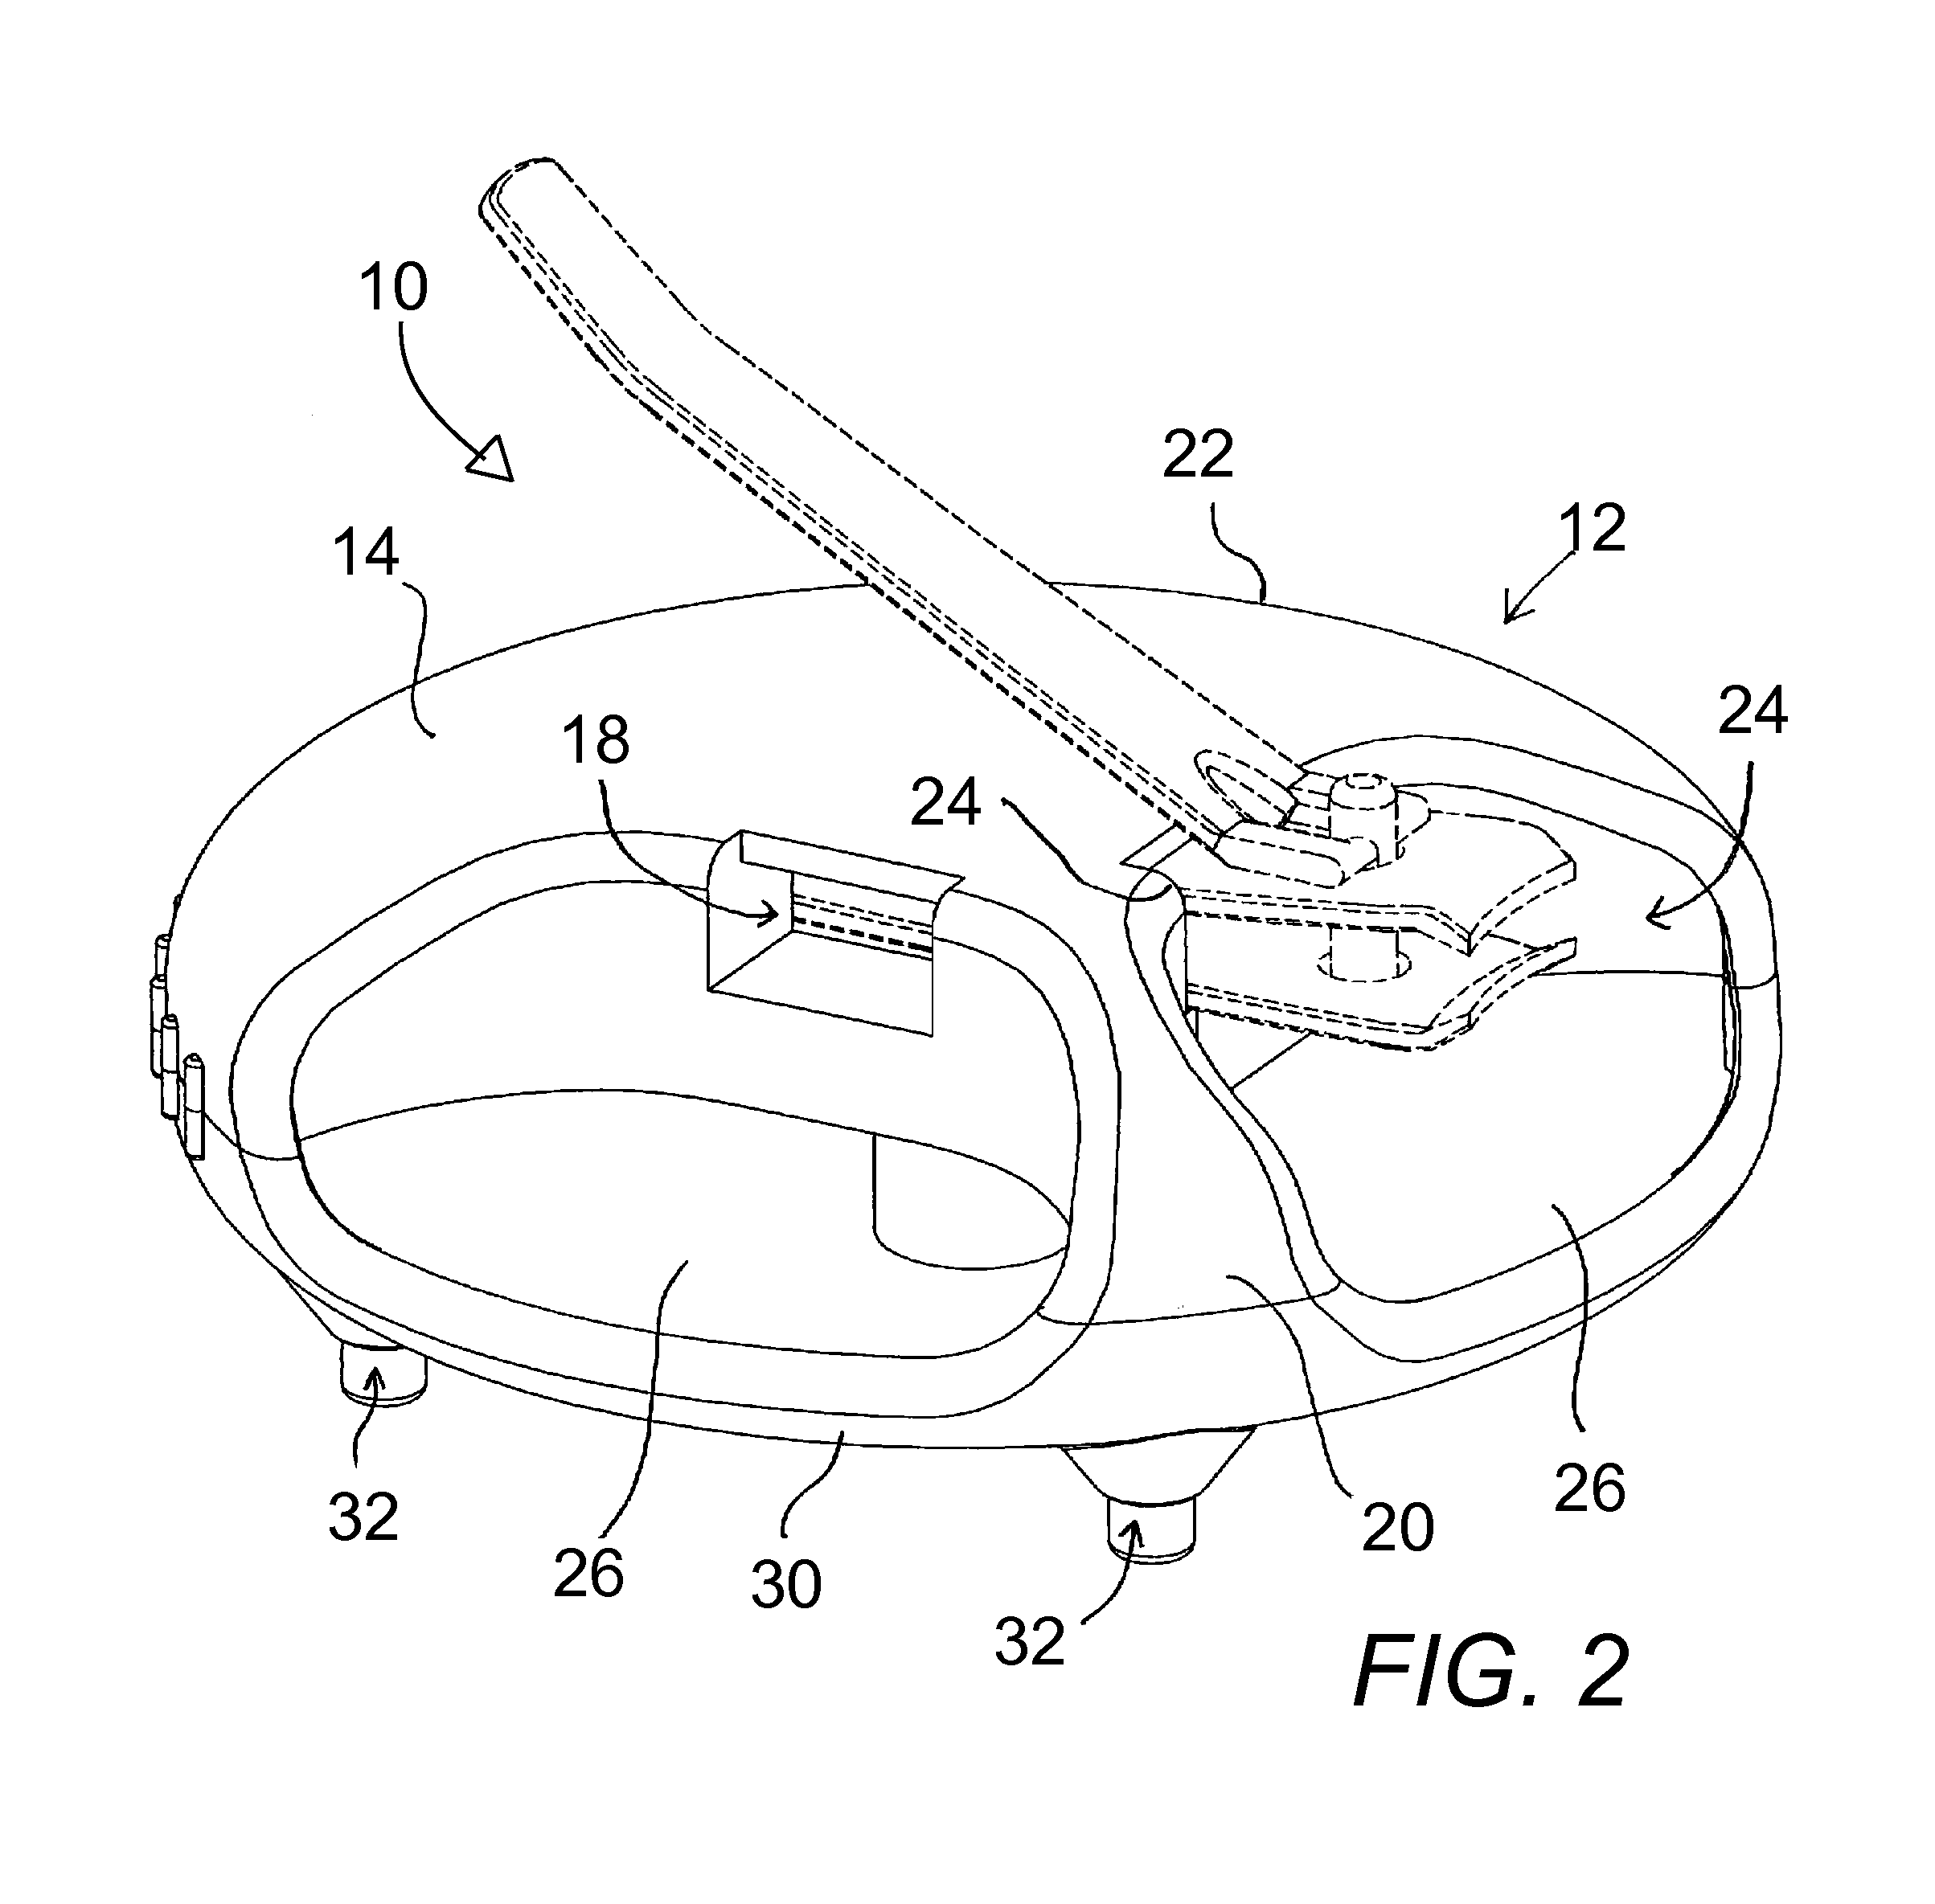 Nail clipper holding device